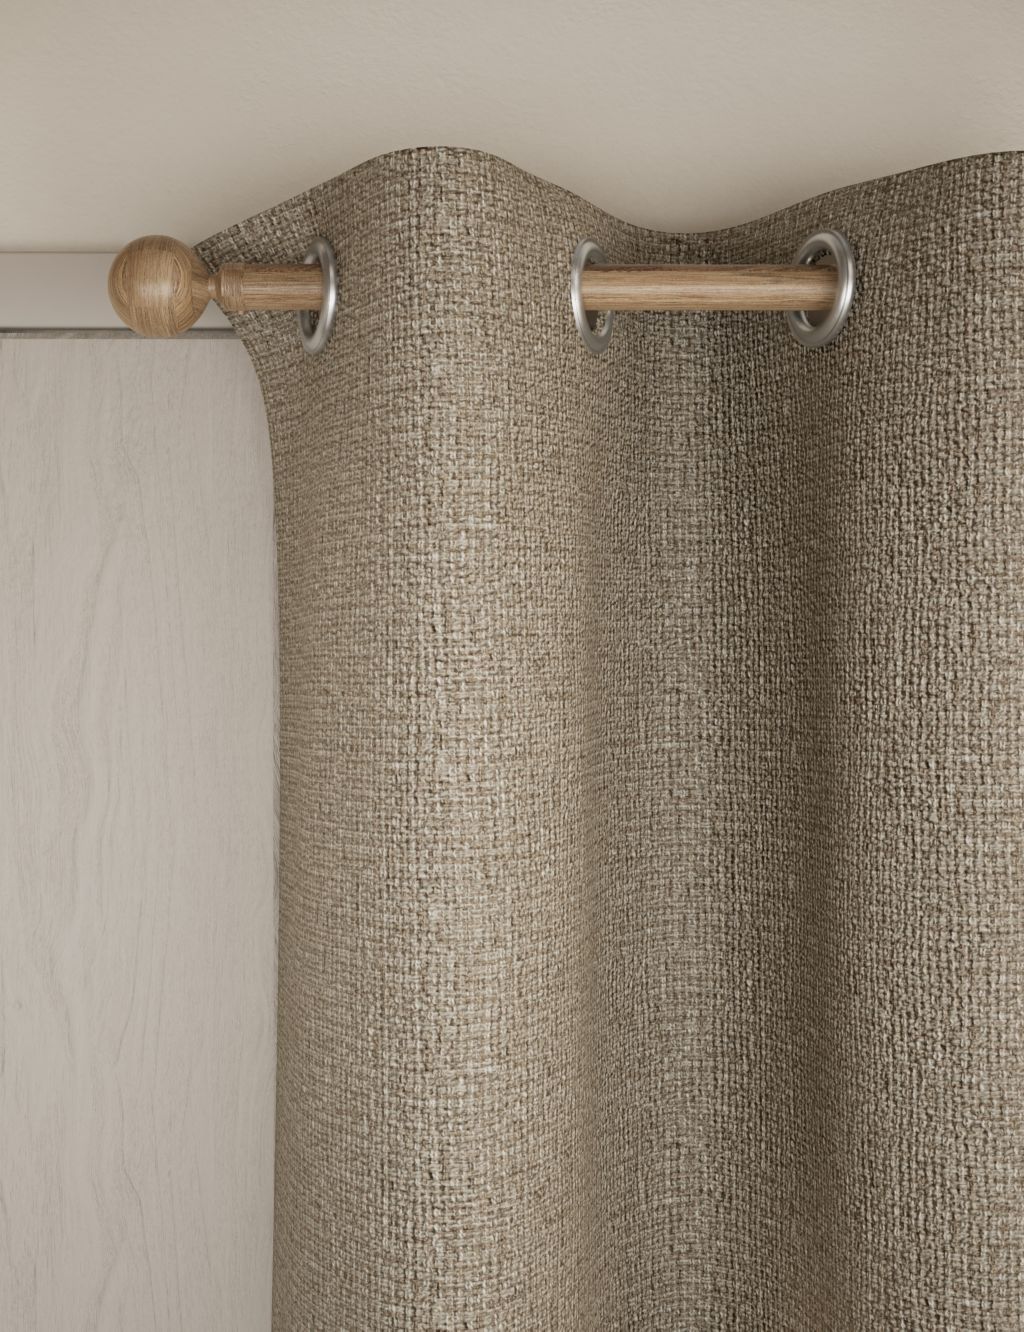 Heavyweight Woven Eyelet Blackout Curtains 3 of 5